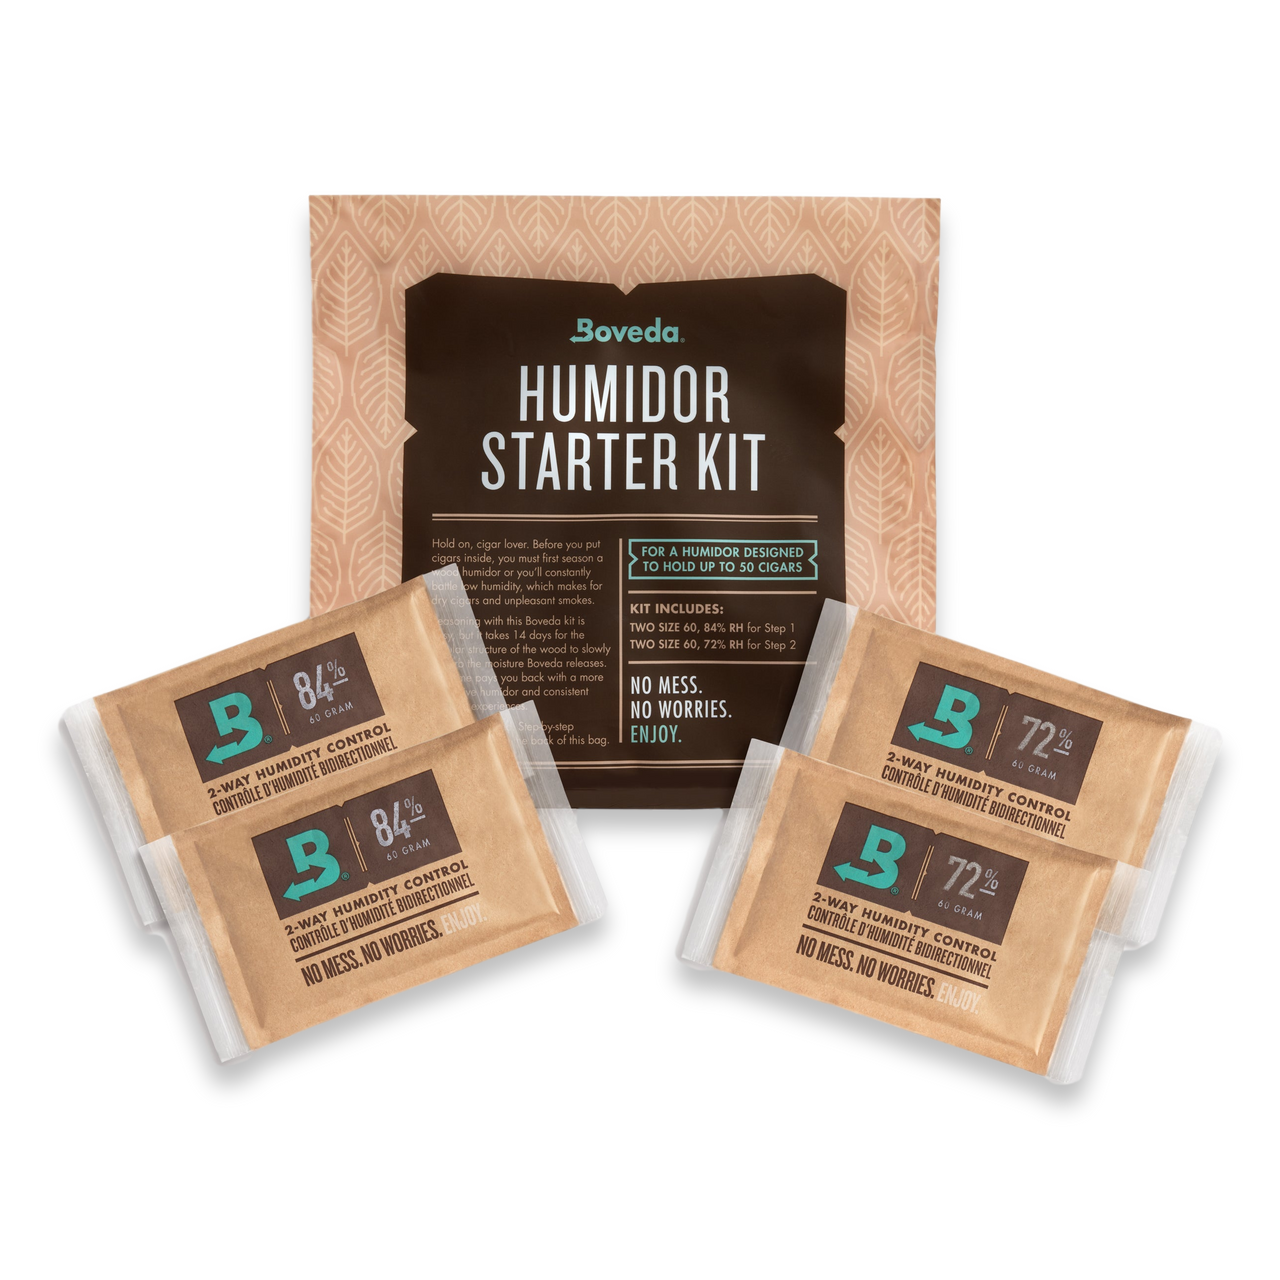 Boveda for 50-Cigar Humidors - First Months